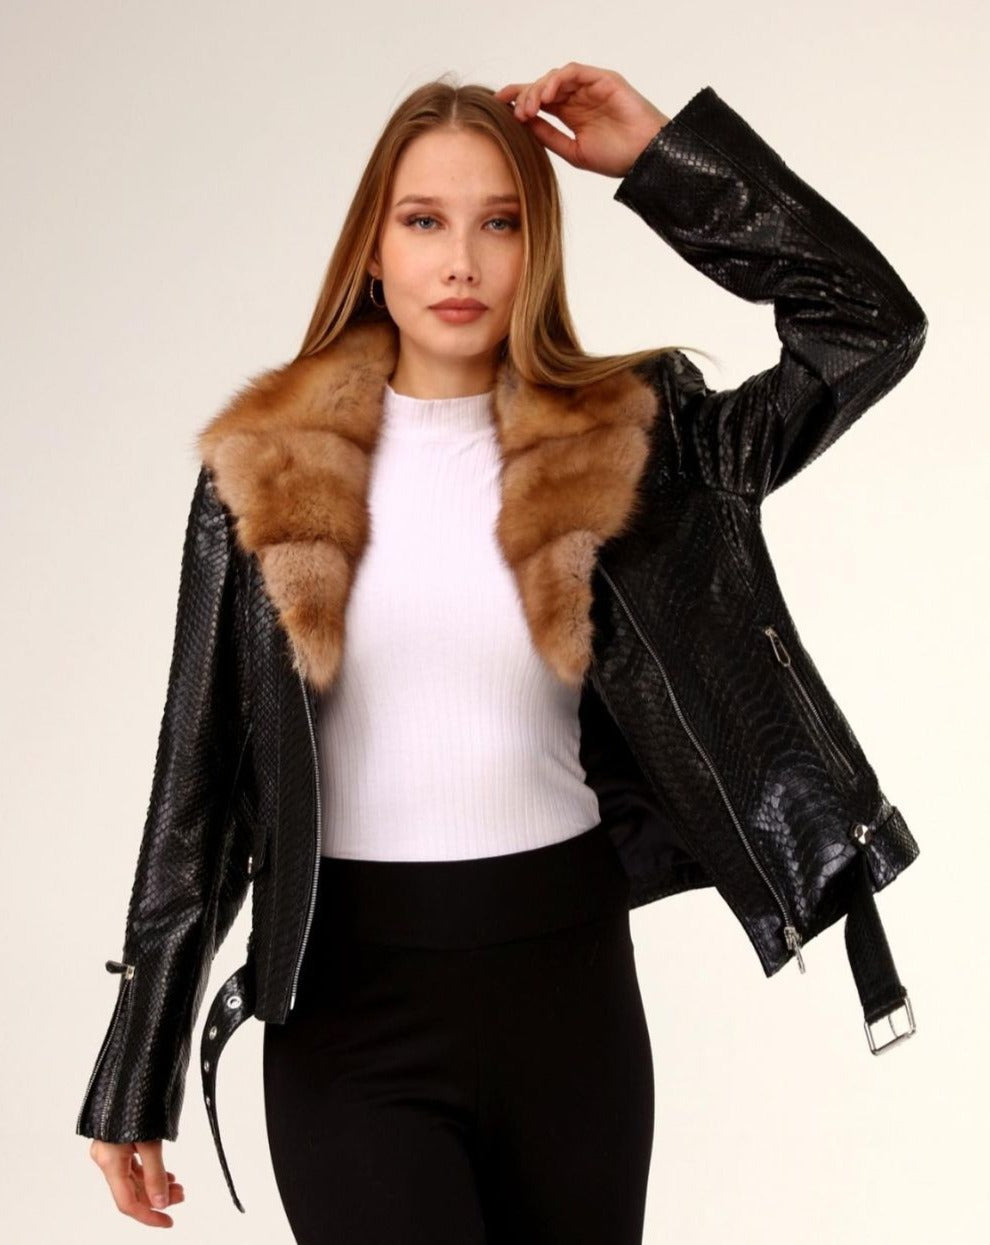 Stylish ILINKA jacket crafted from premium python leather with a luxurious mink fur collar, modeled with elegance.